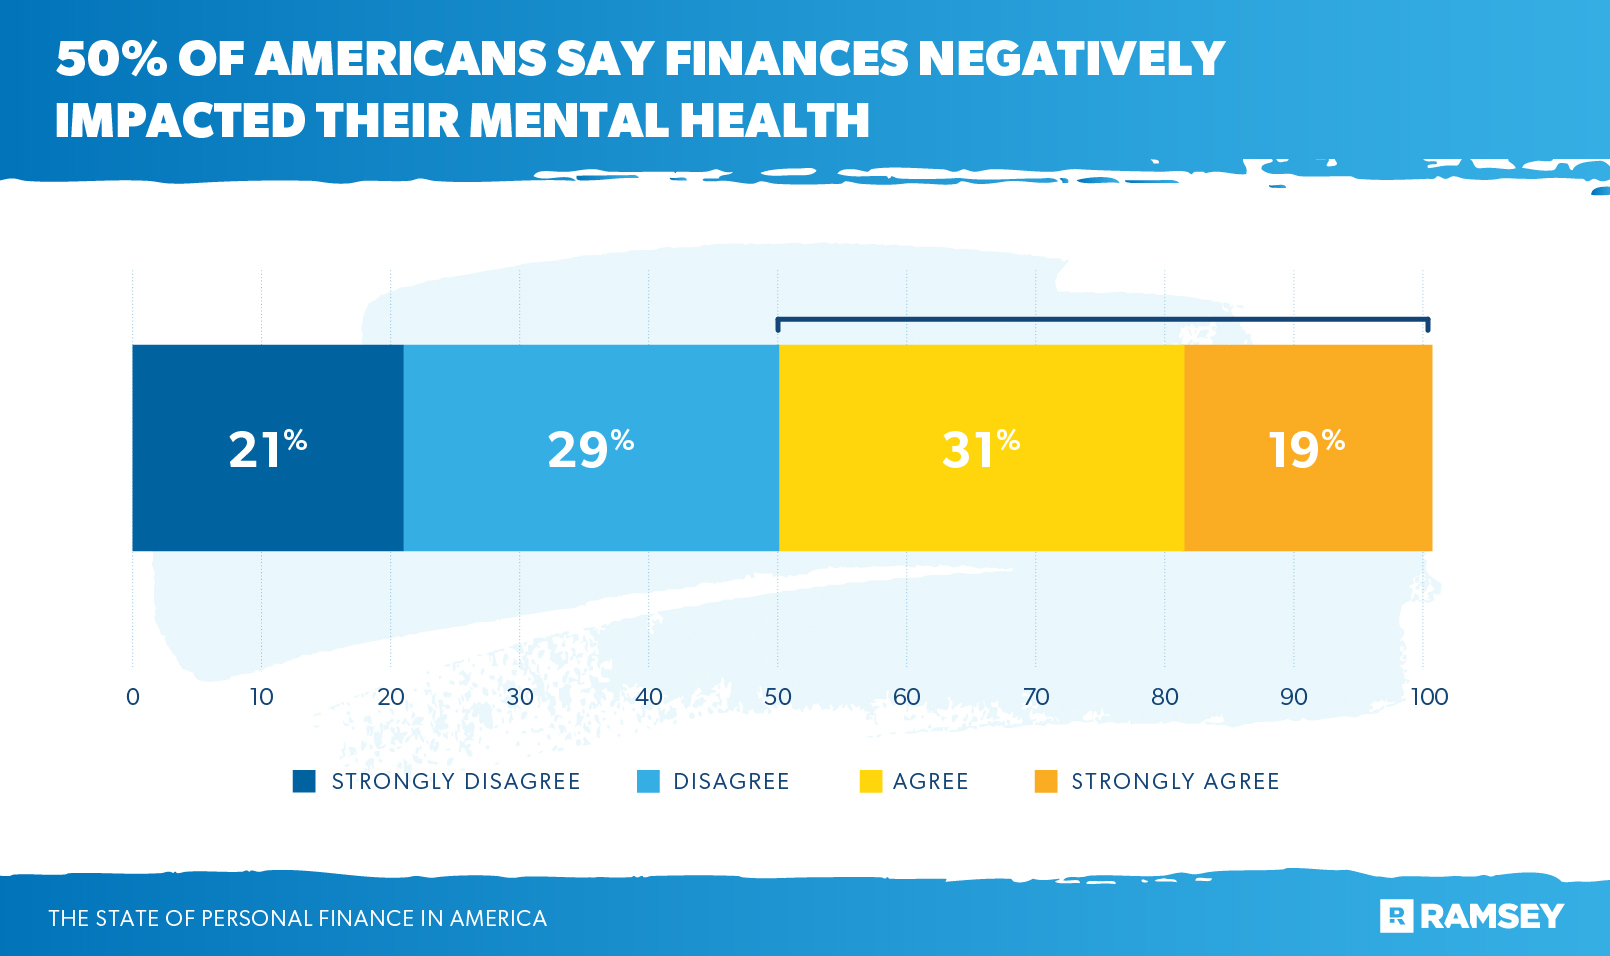 50% of Americans say finances negatively impacted their mental health